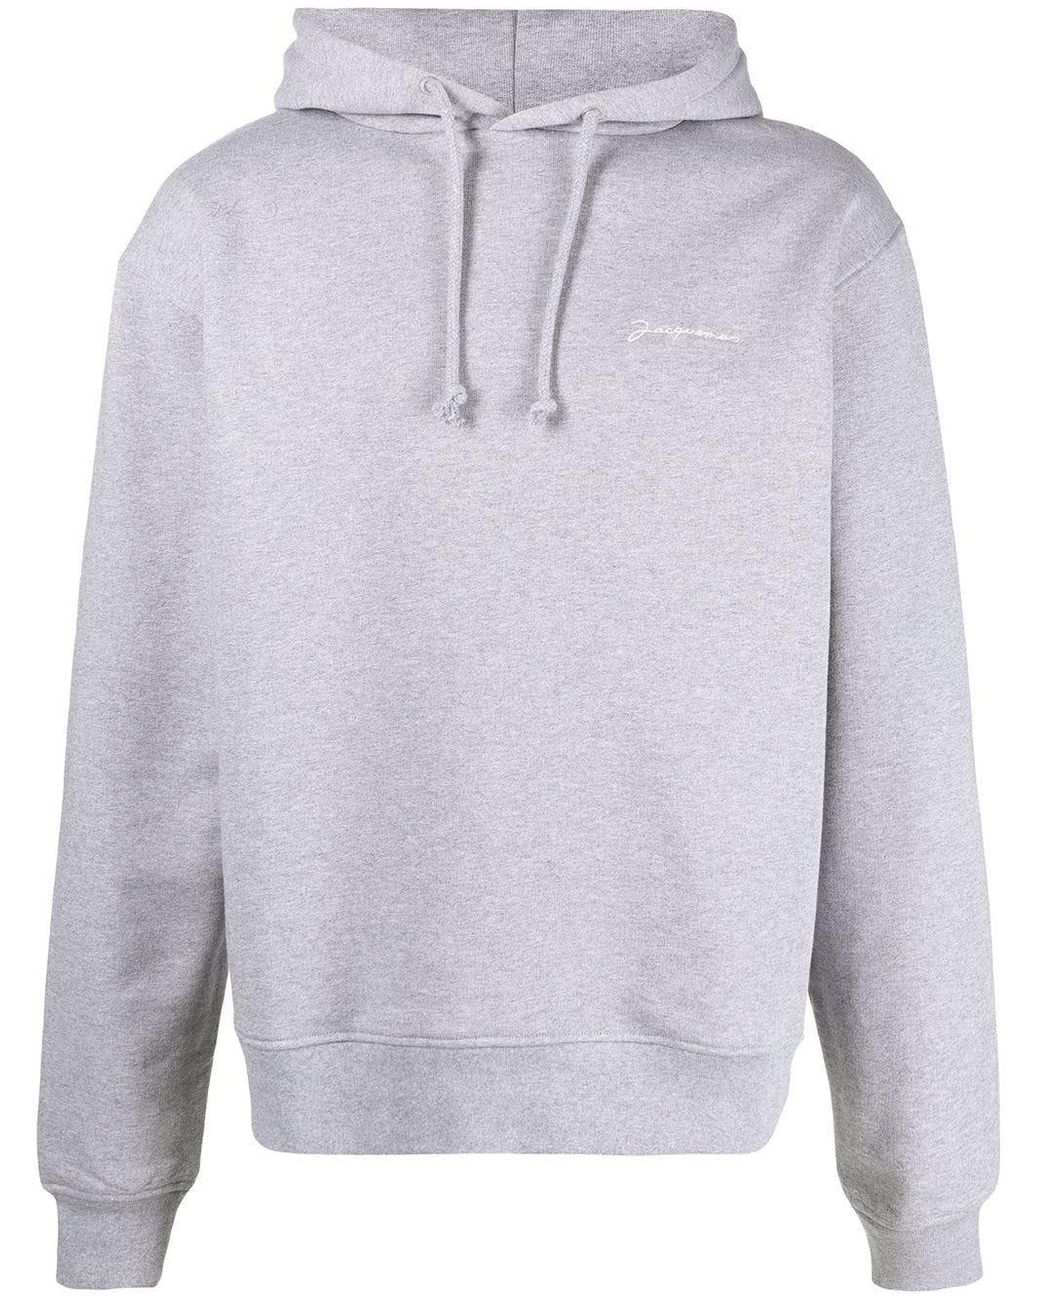 Jacquemus Hooded Le Sweatshirt in Grey (Gray) for Men - Lyst